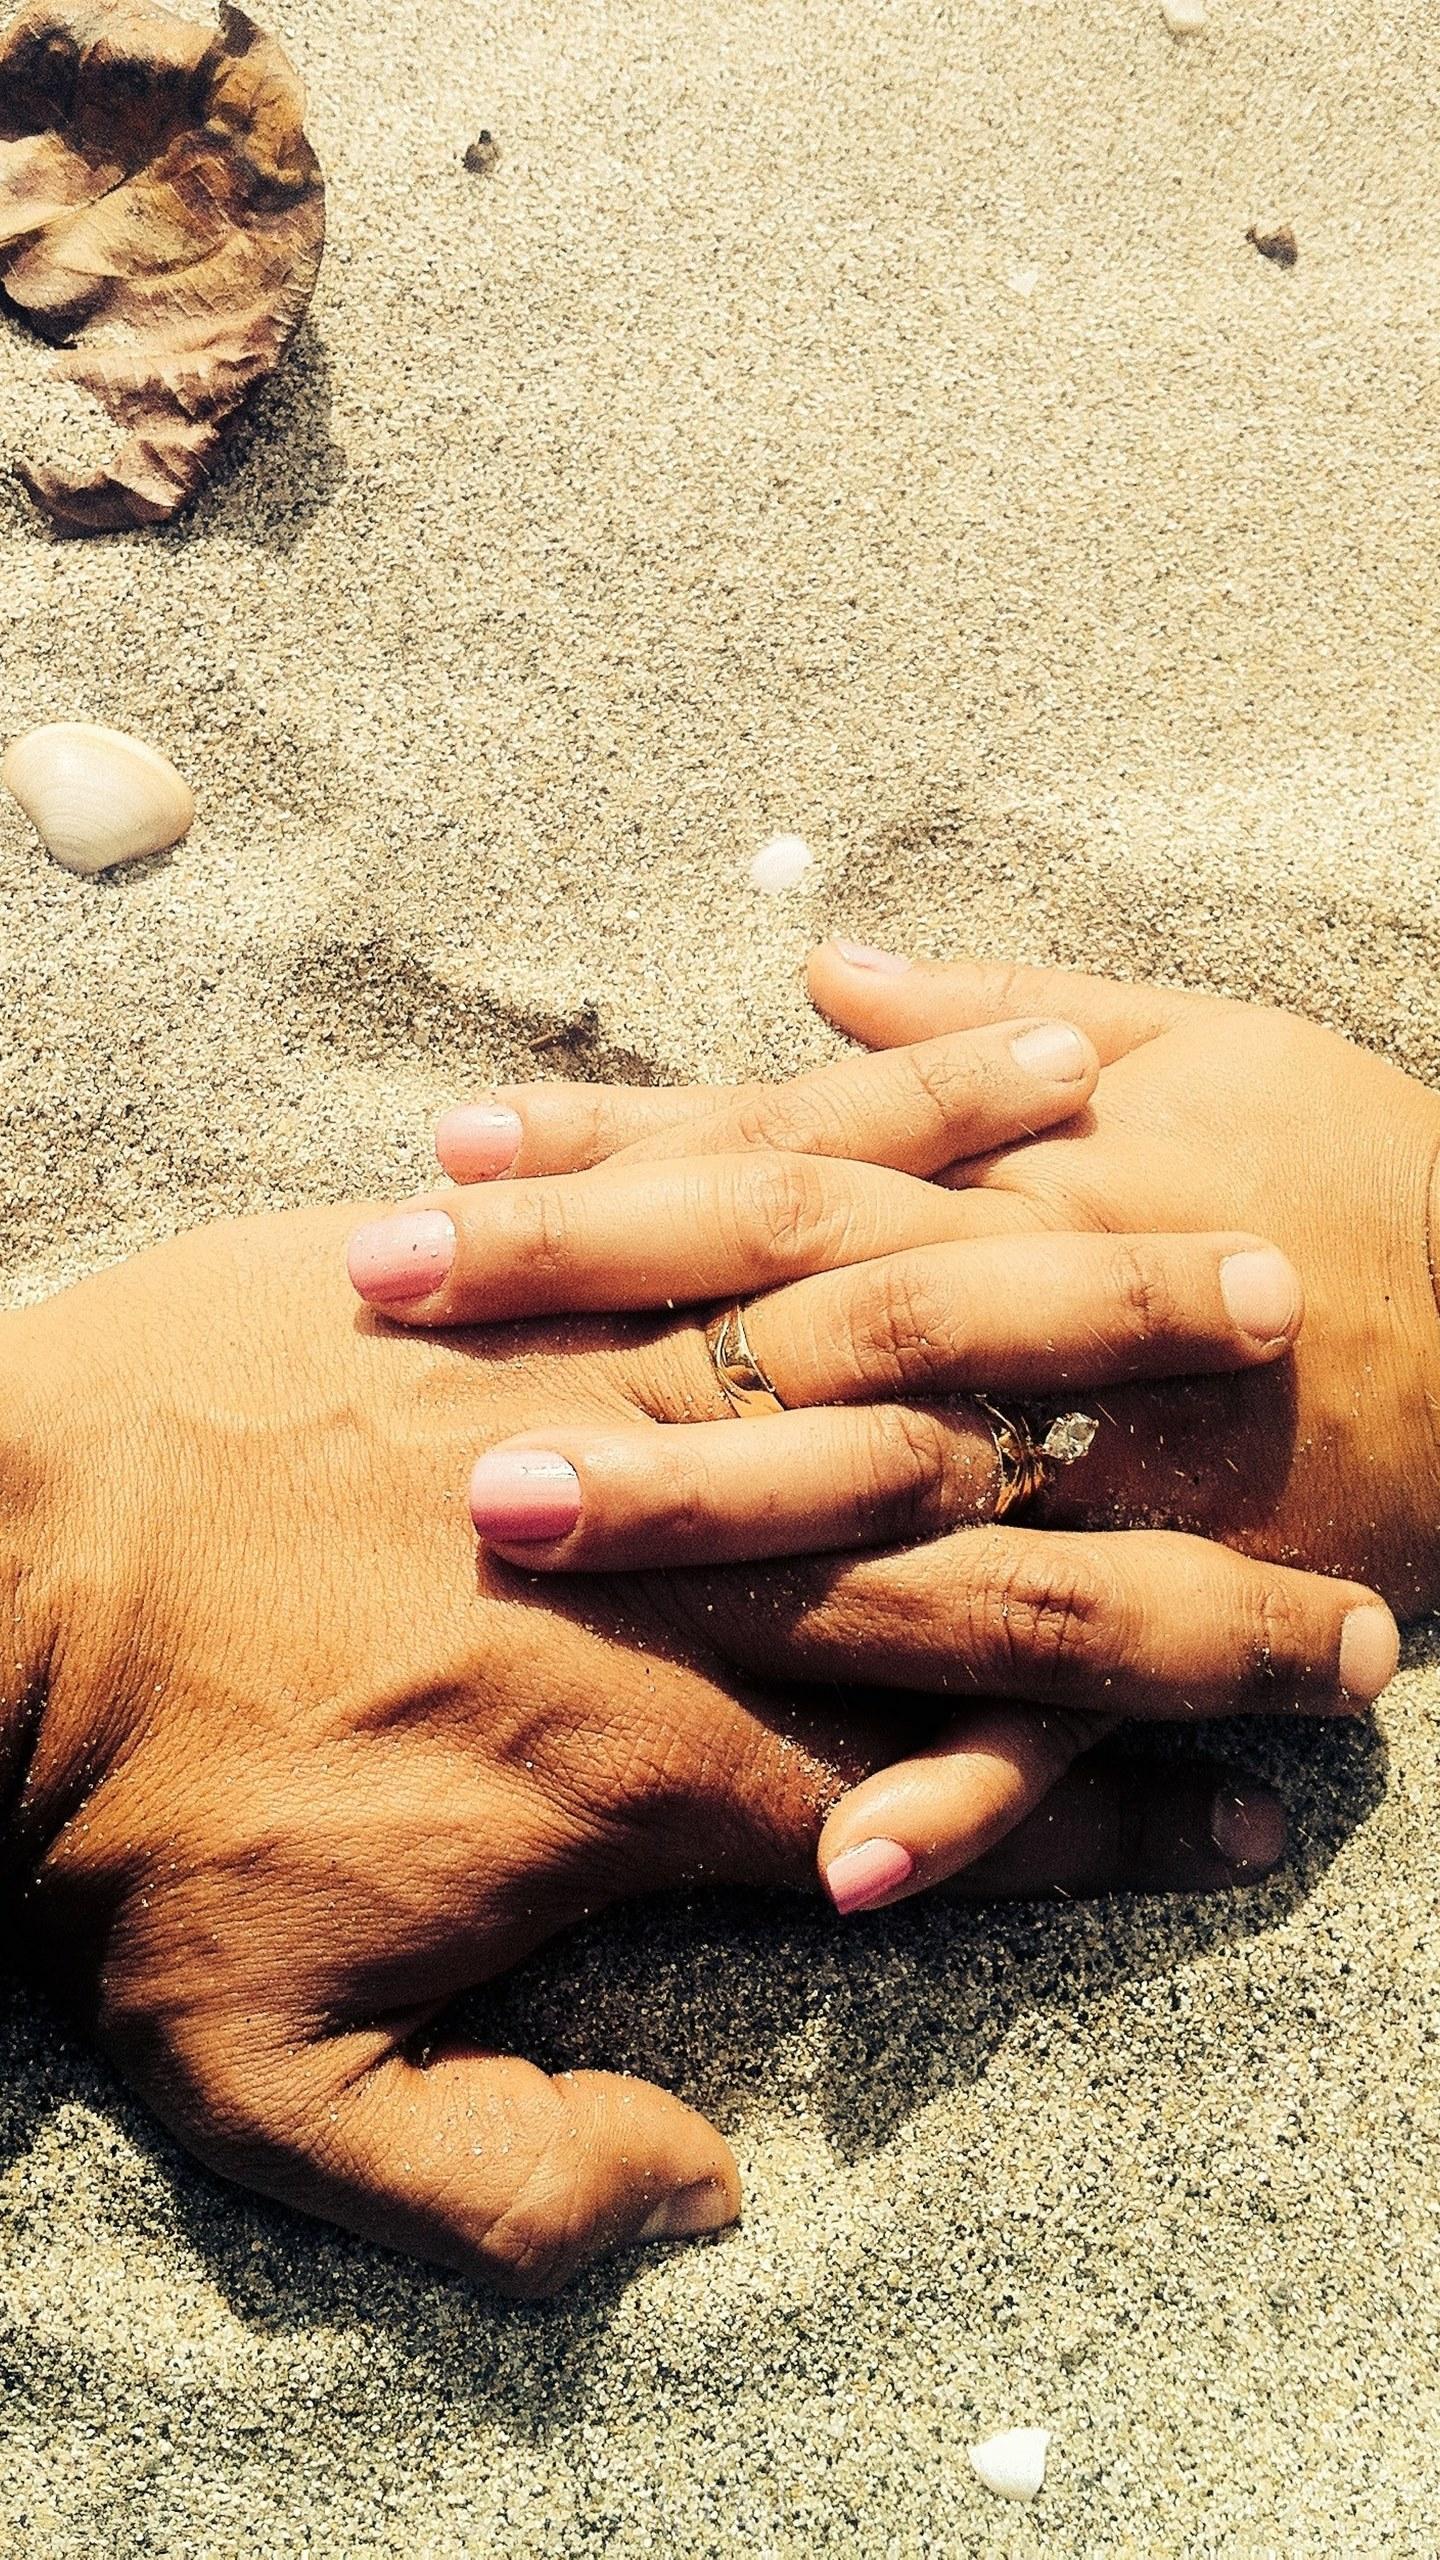 HD wallpaper, A Married Couple At The Beach Wearing Wedding Rings Holds Hands On The Sand, Lovers Hands On Sand, Samsung Galaxy Note 5 Duos Wallpaper 1080P, 1440X2560